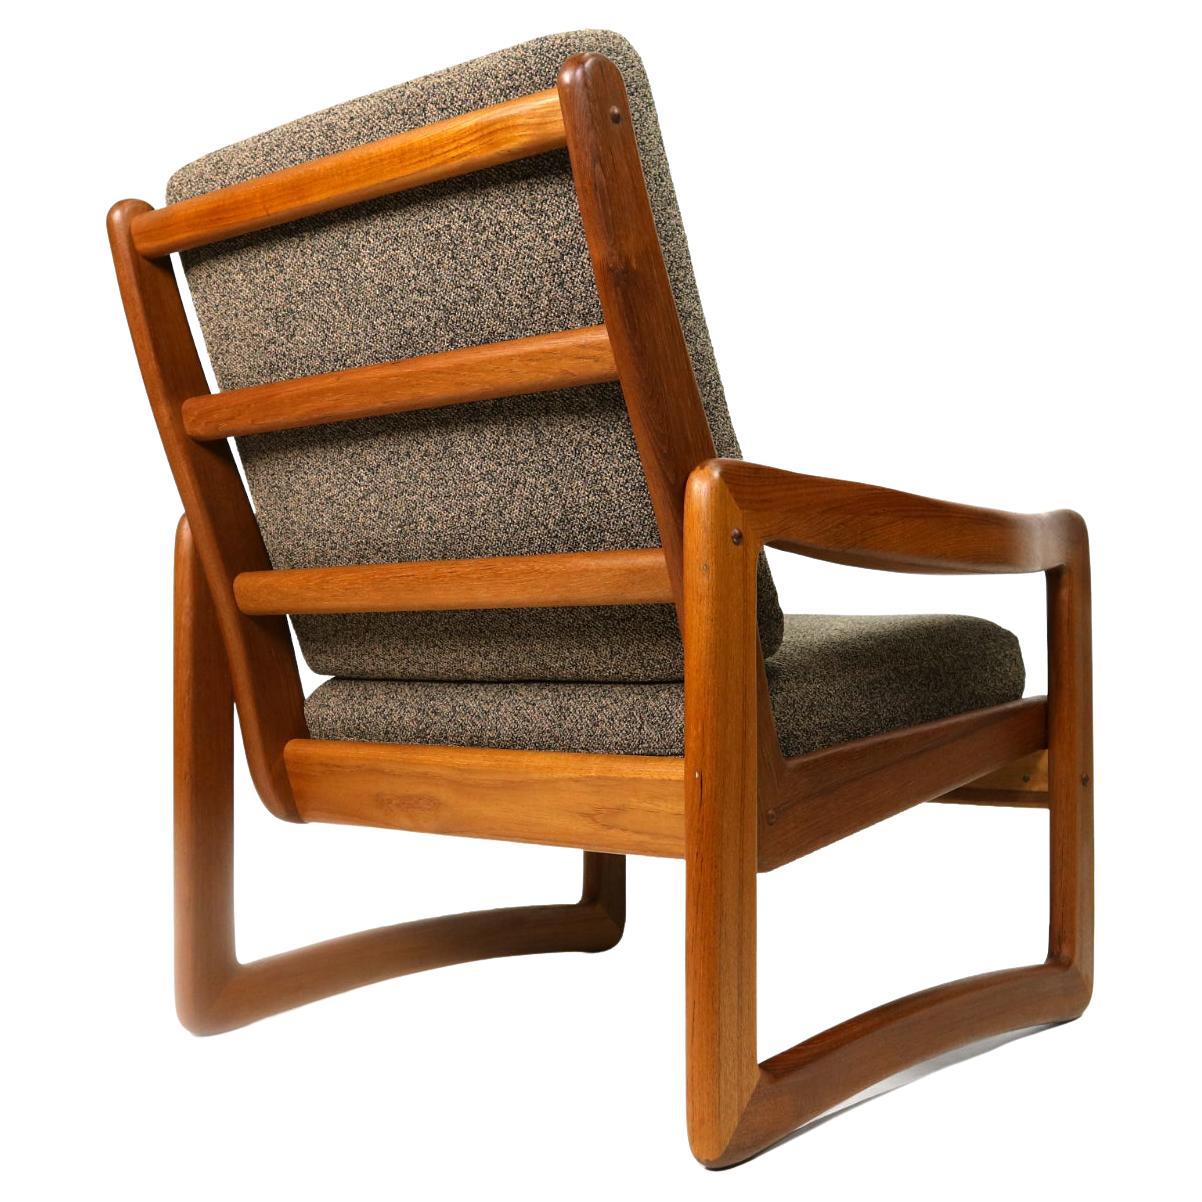 Exceptional vintage solid teak armchair by Sun Cabinet. The Danish modern design features an elegantly contoured U-shaped leg that joins seamlessly with the arms. The ladder rung backside is particularly striking, elevating this lounge chair amongst